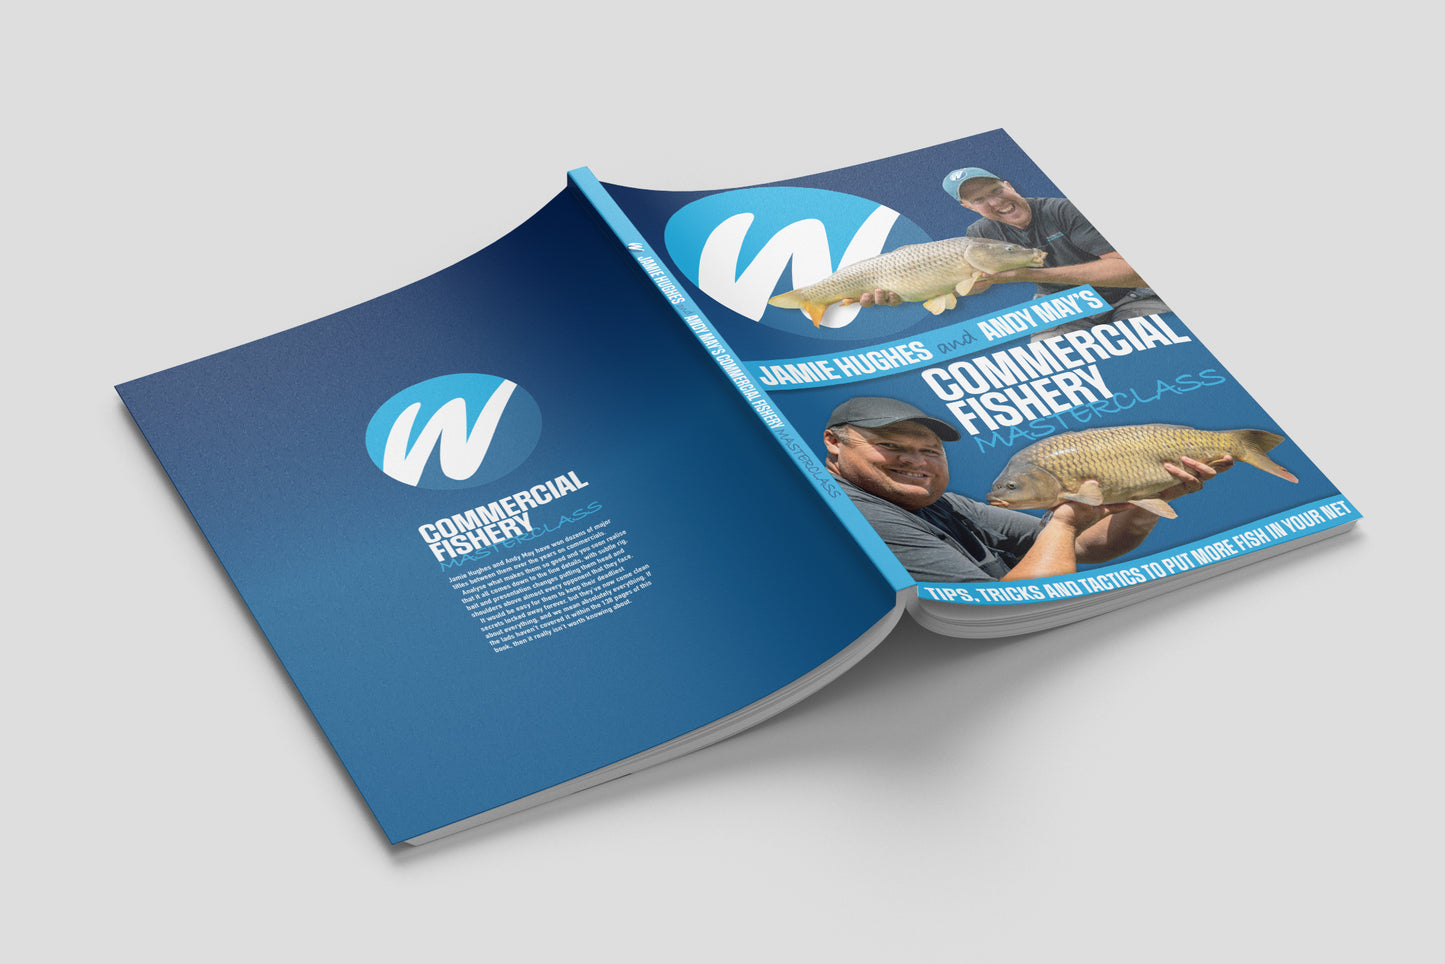 Winning Ways Commercial Fishery Masterclass Book (BACK IN STOCK)